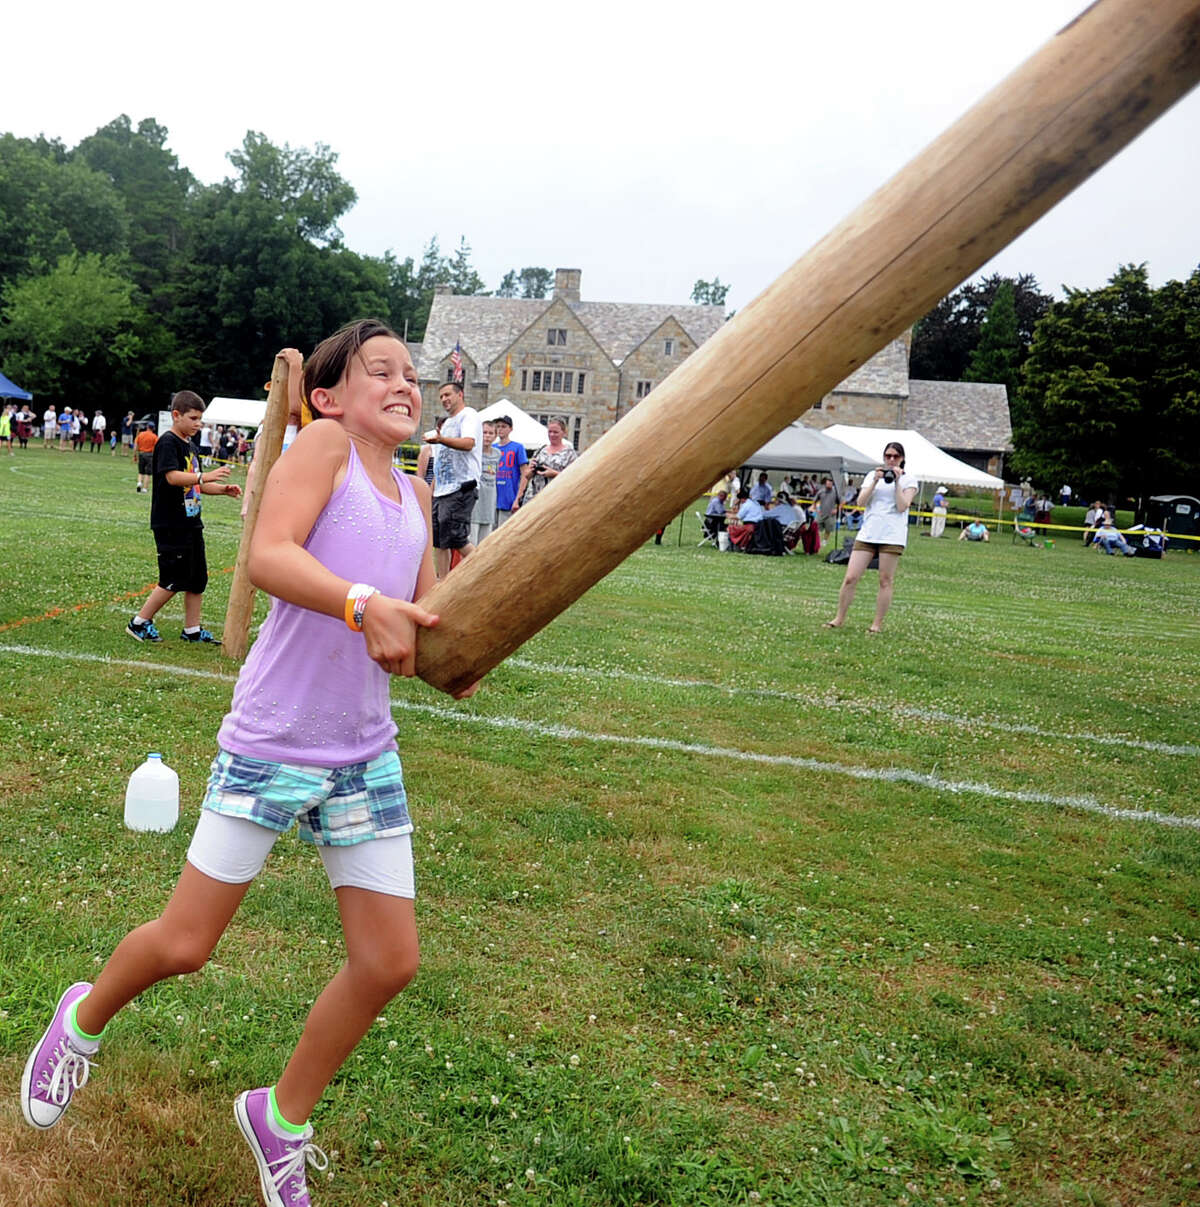 Isabella Fragomeli, 10, of Pleasanton, Calif., participates in the children's Caber Toss during the Round Hill Highland Games at Cranbury Park in Norwalk on Saturday, July 7, 2012.